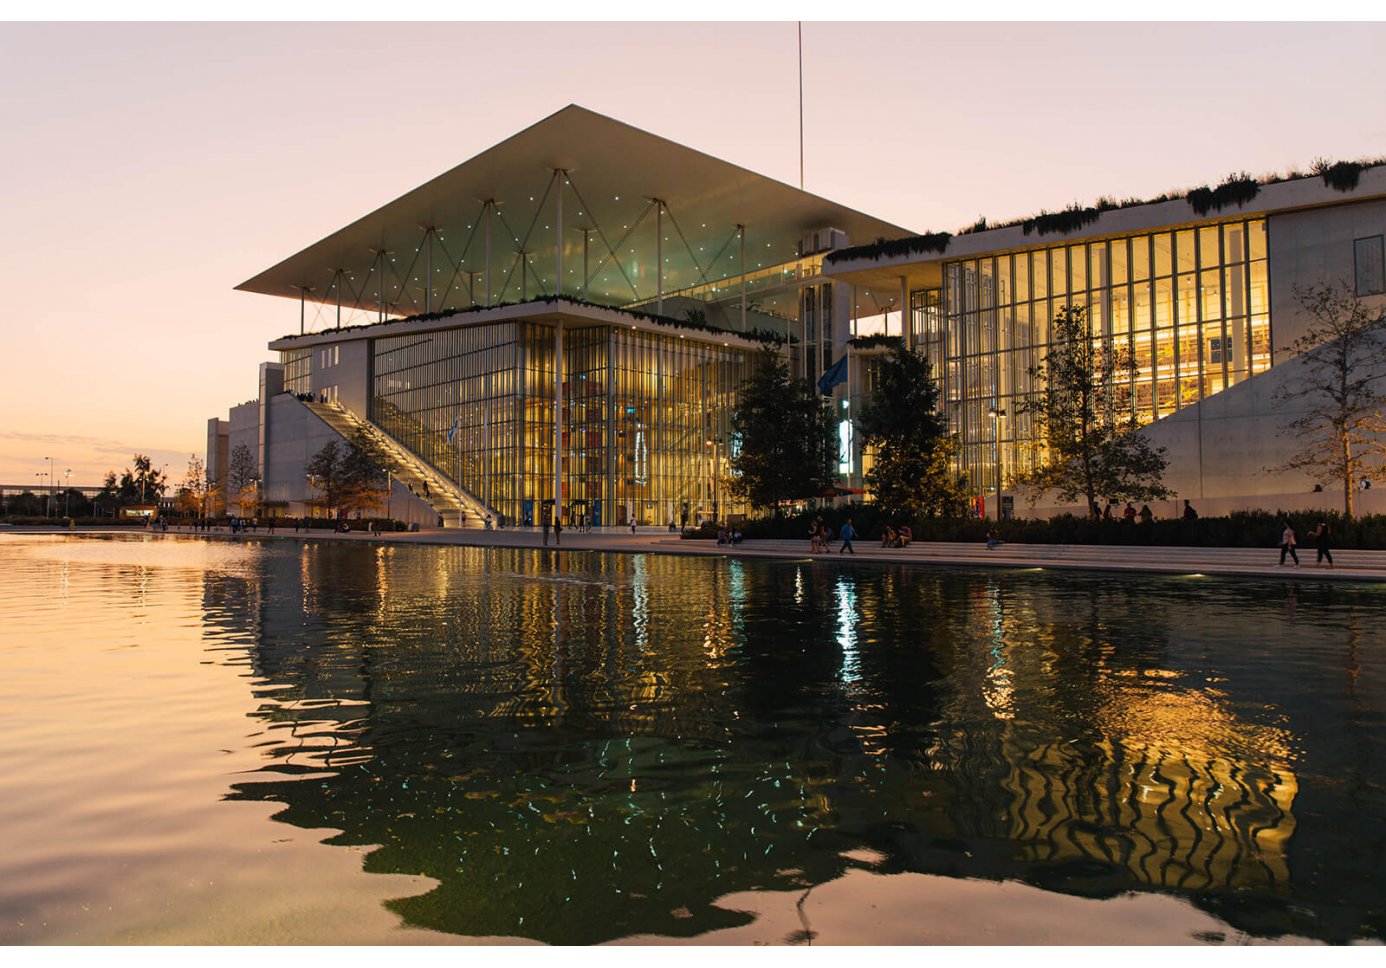 The stavros niarchos foundation cultural center and its canal at susnet. 